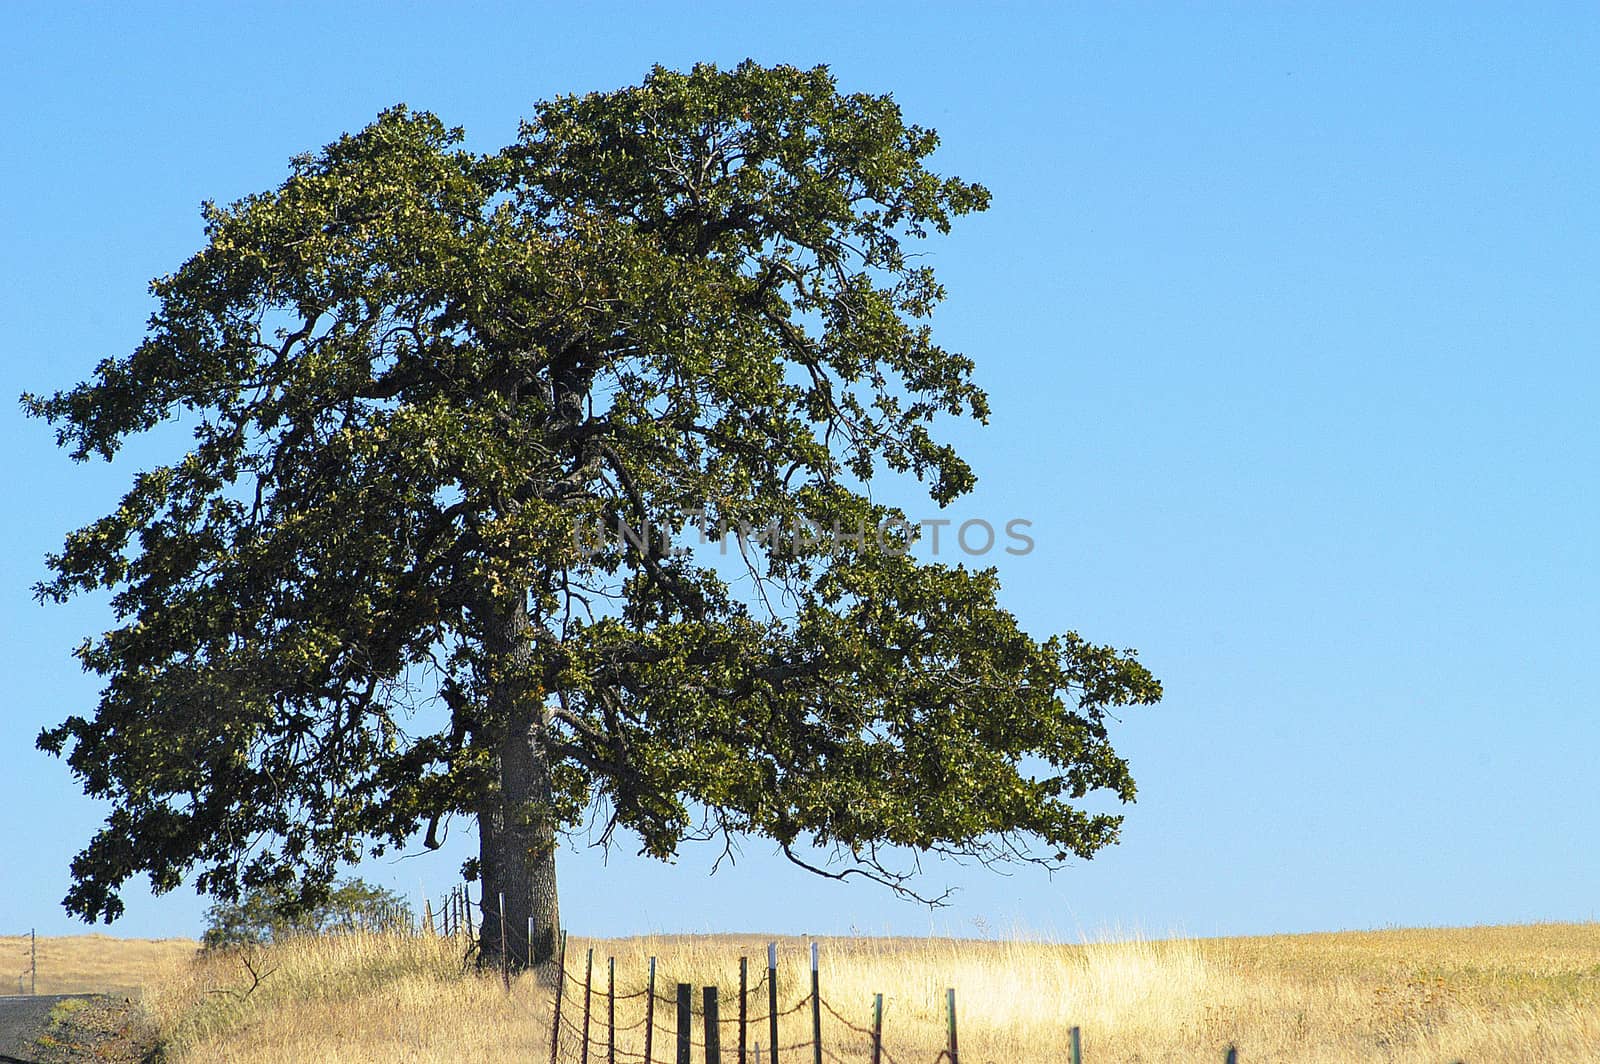 Small Tree on hillside Goldendale, Washington by cestes001